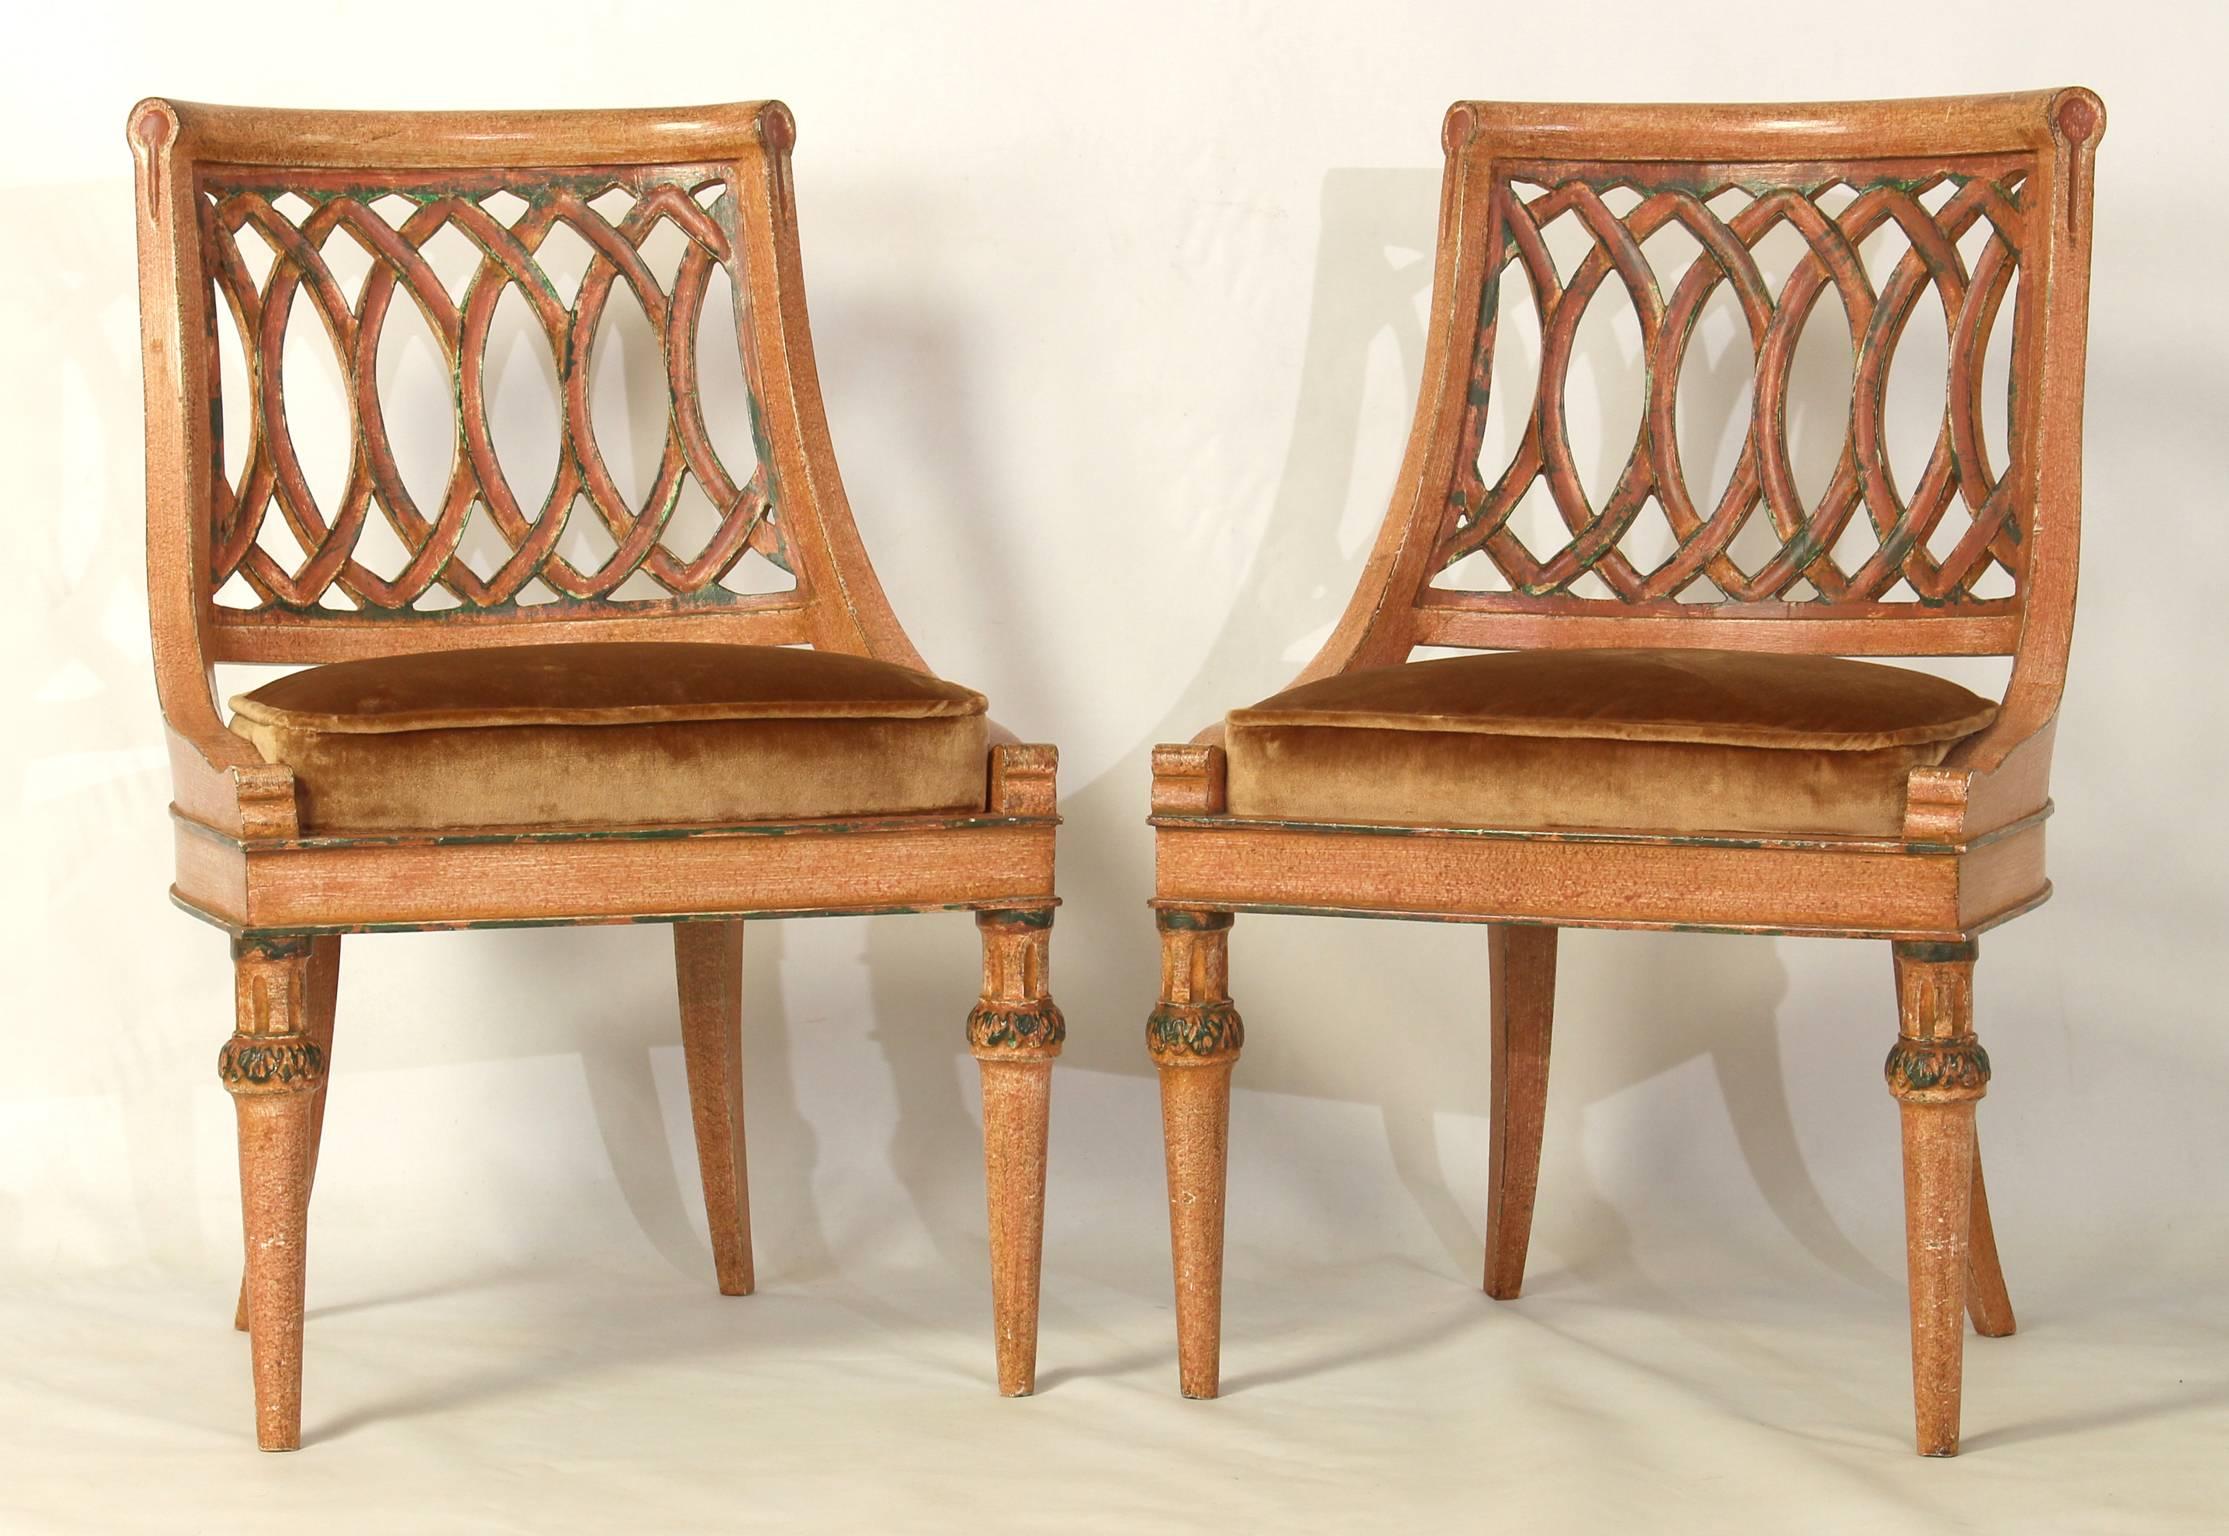 A charming pair of mid-20th century Italian carved and paint decorated slipper chairs with silk velvet upholstered seats.